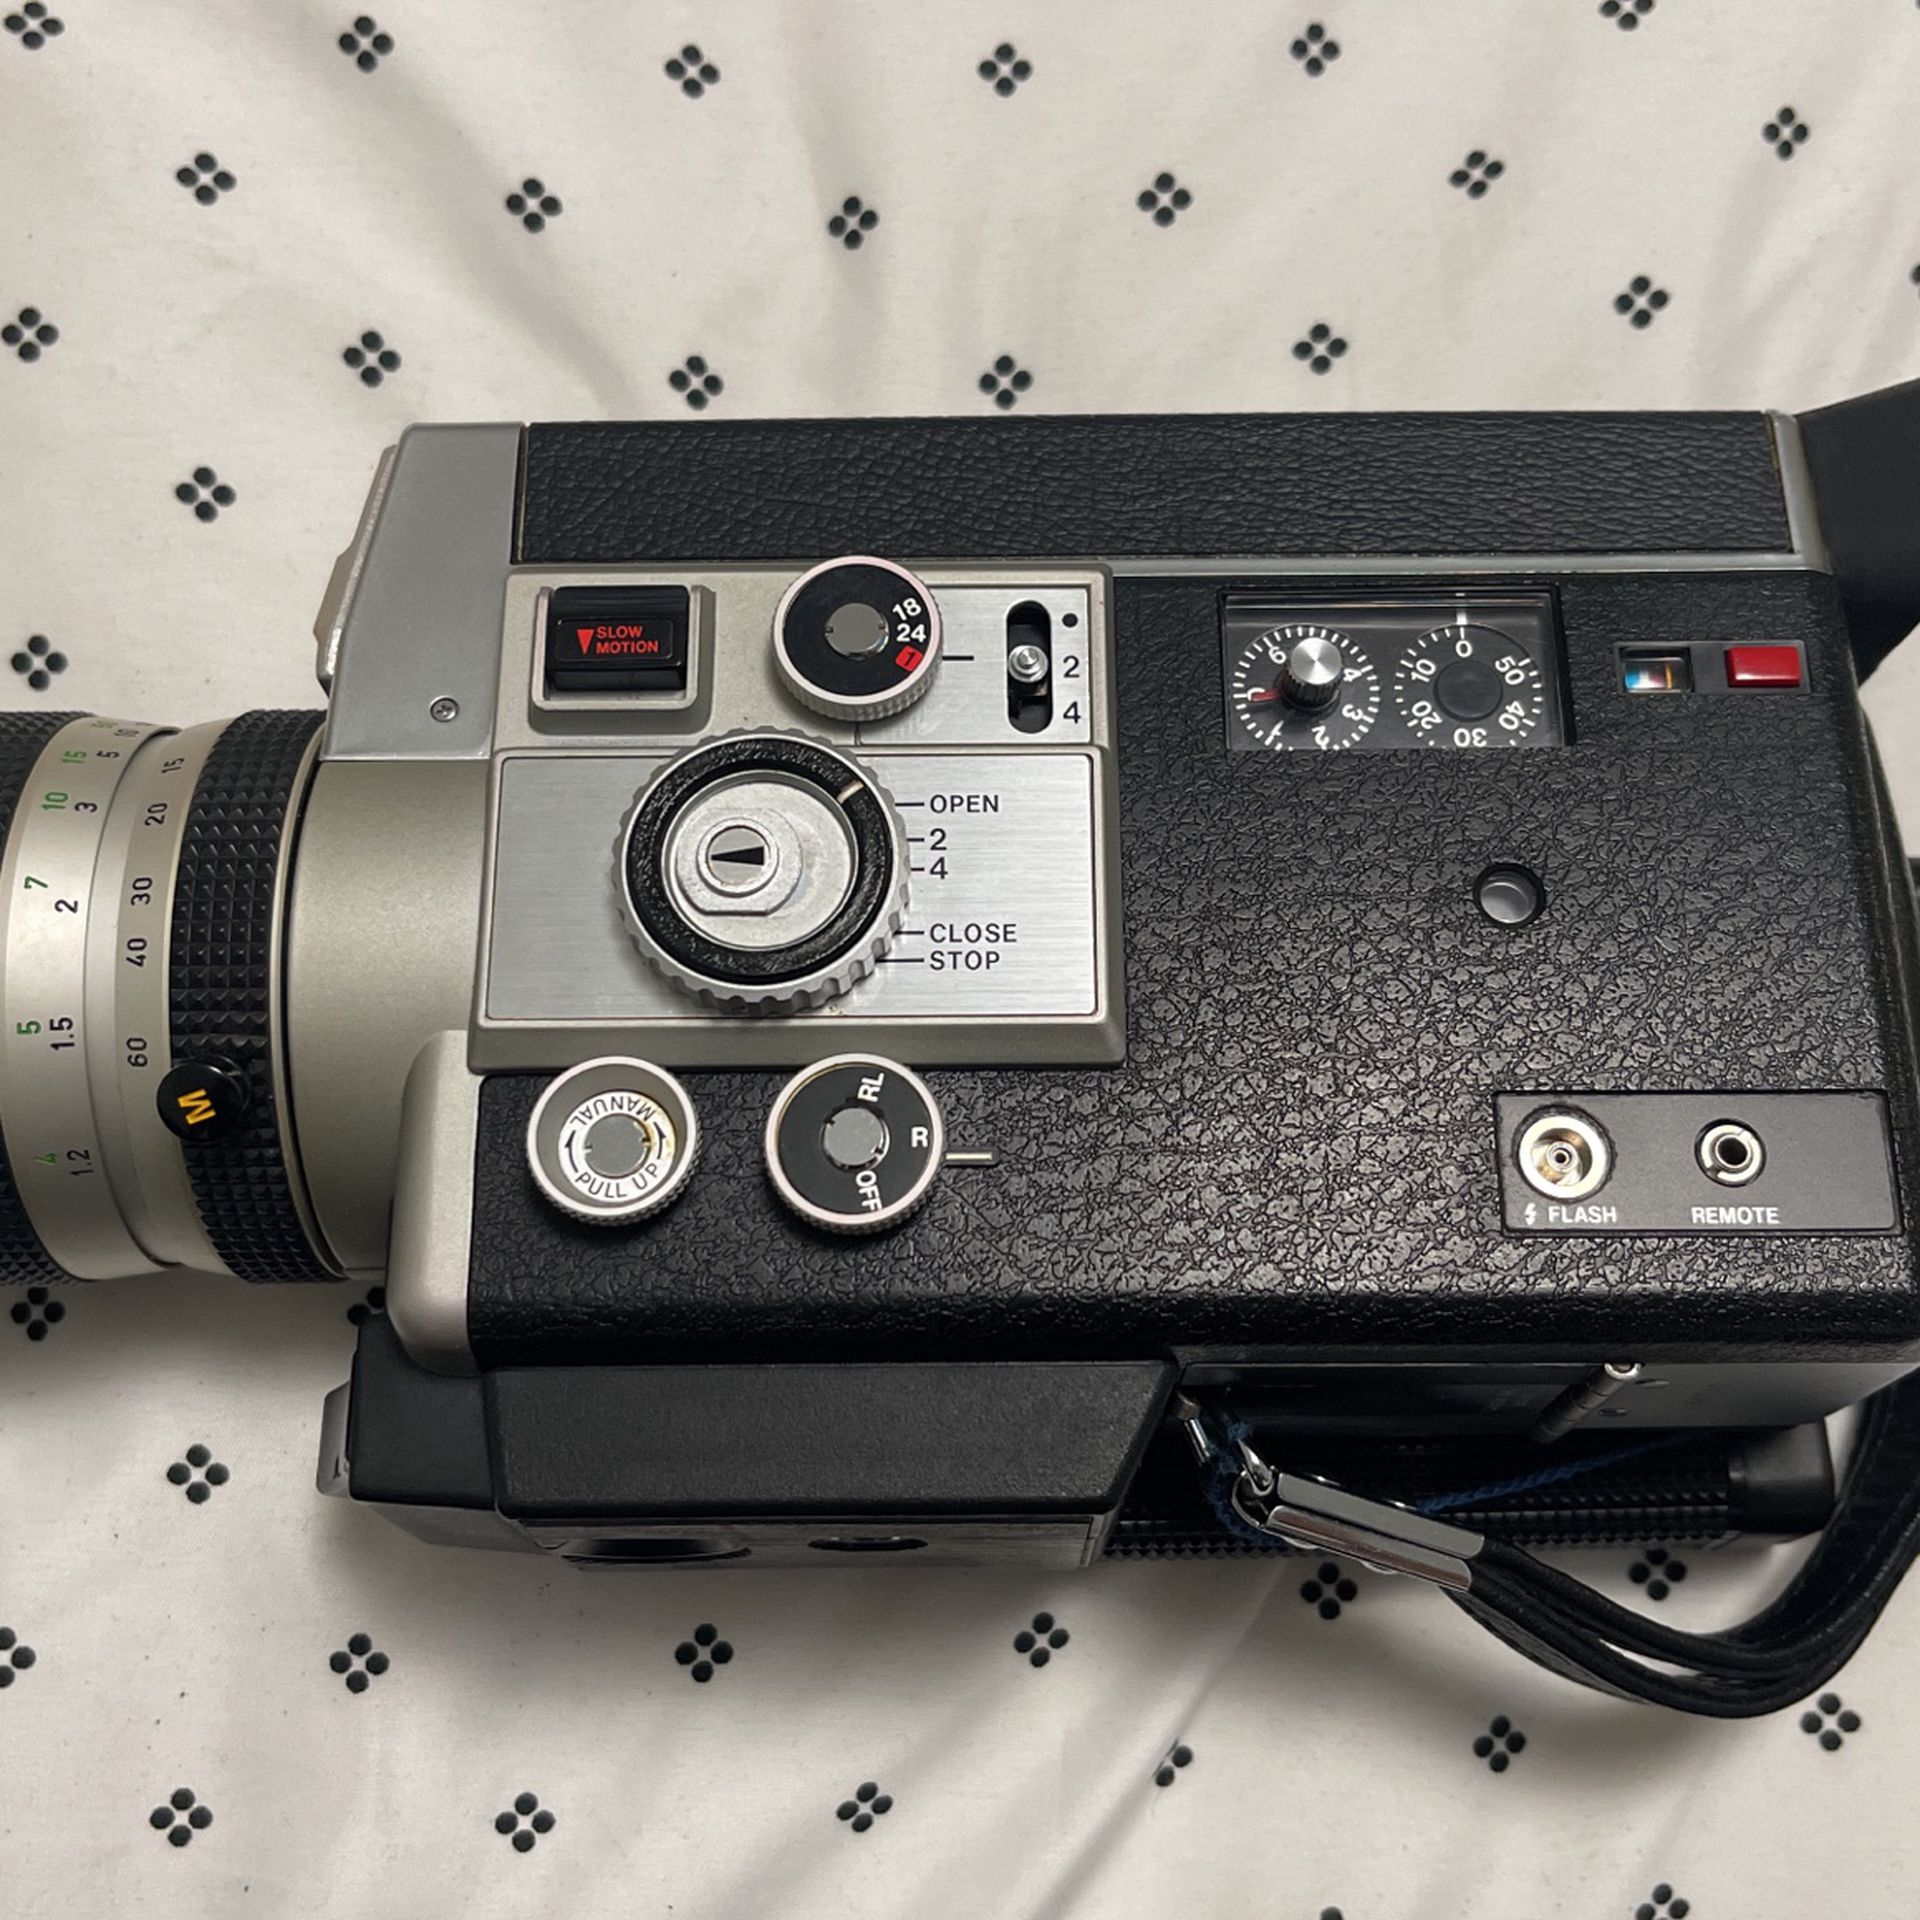 Canon Auto Zoom 814 for Sale in Teaneck, NJ - OfferUp